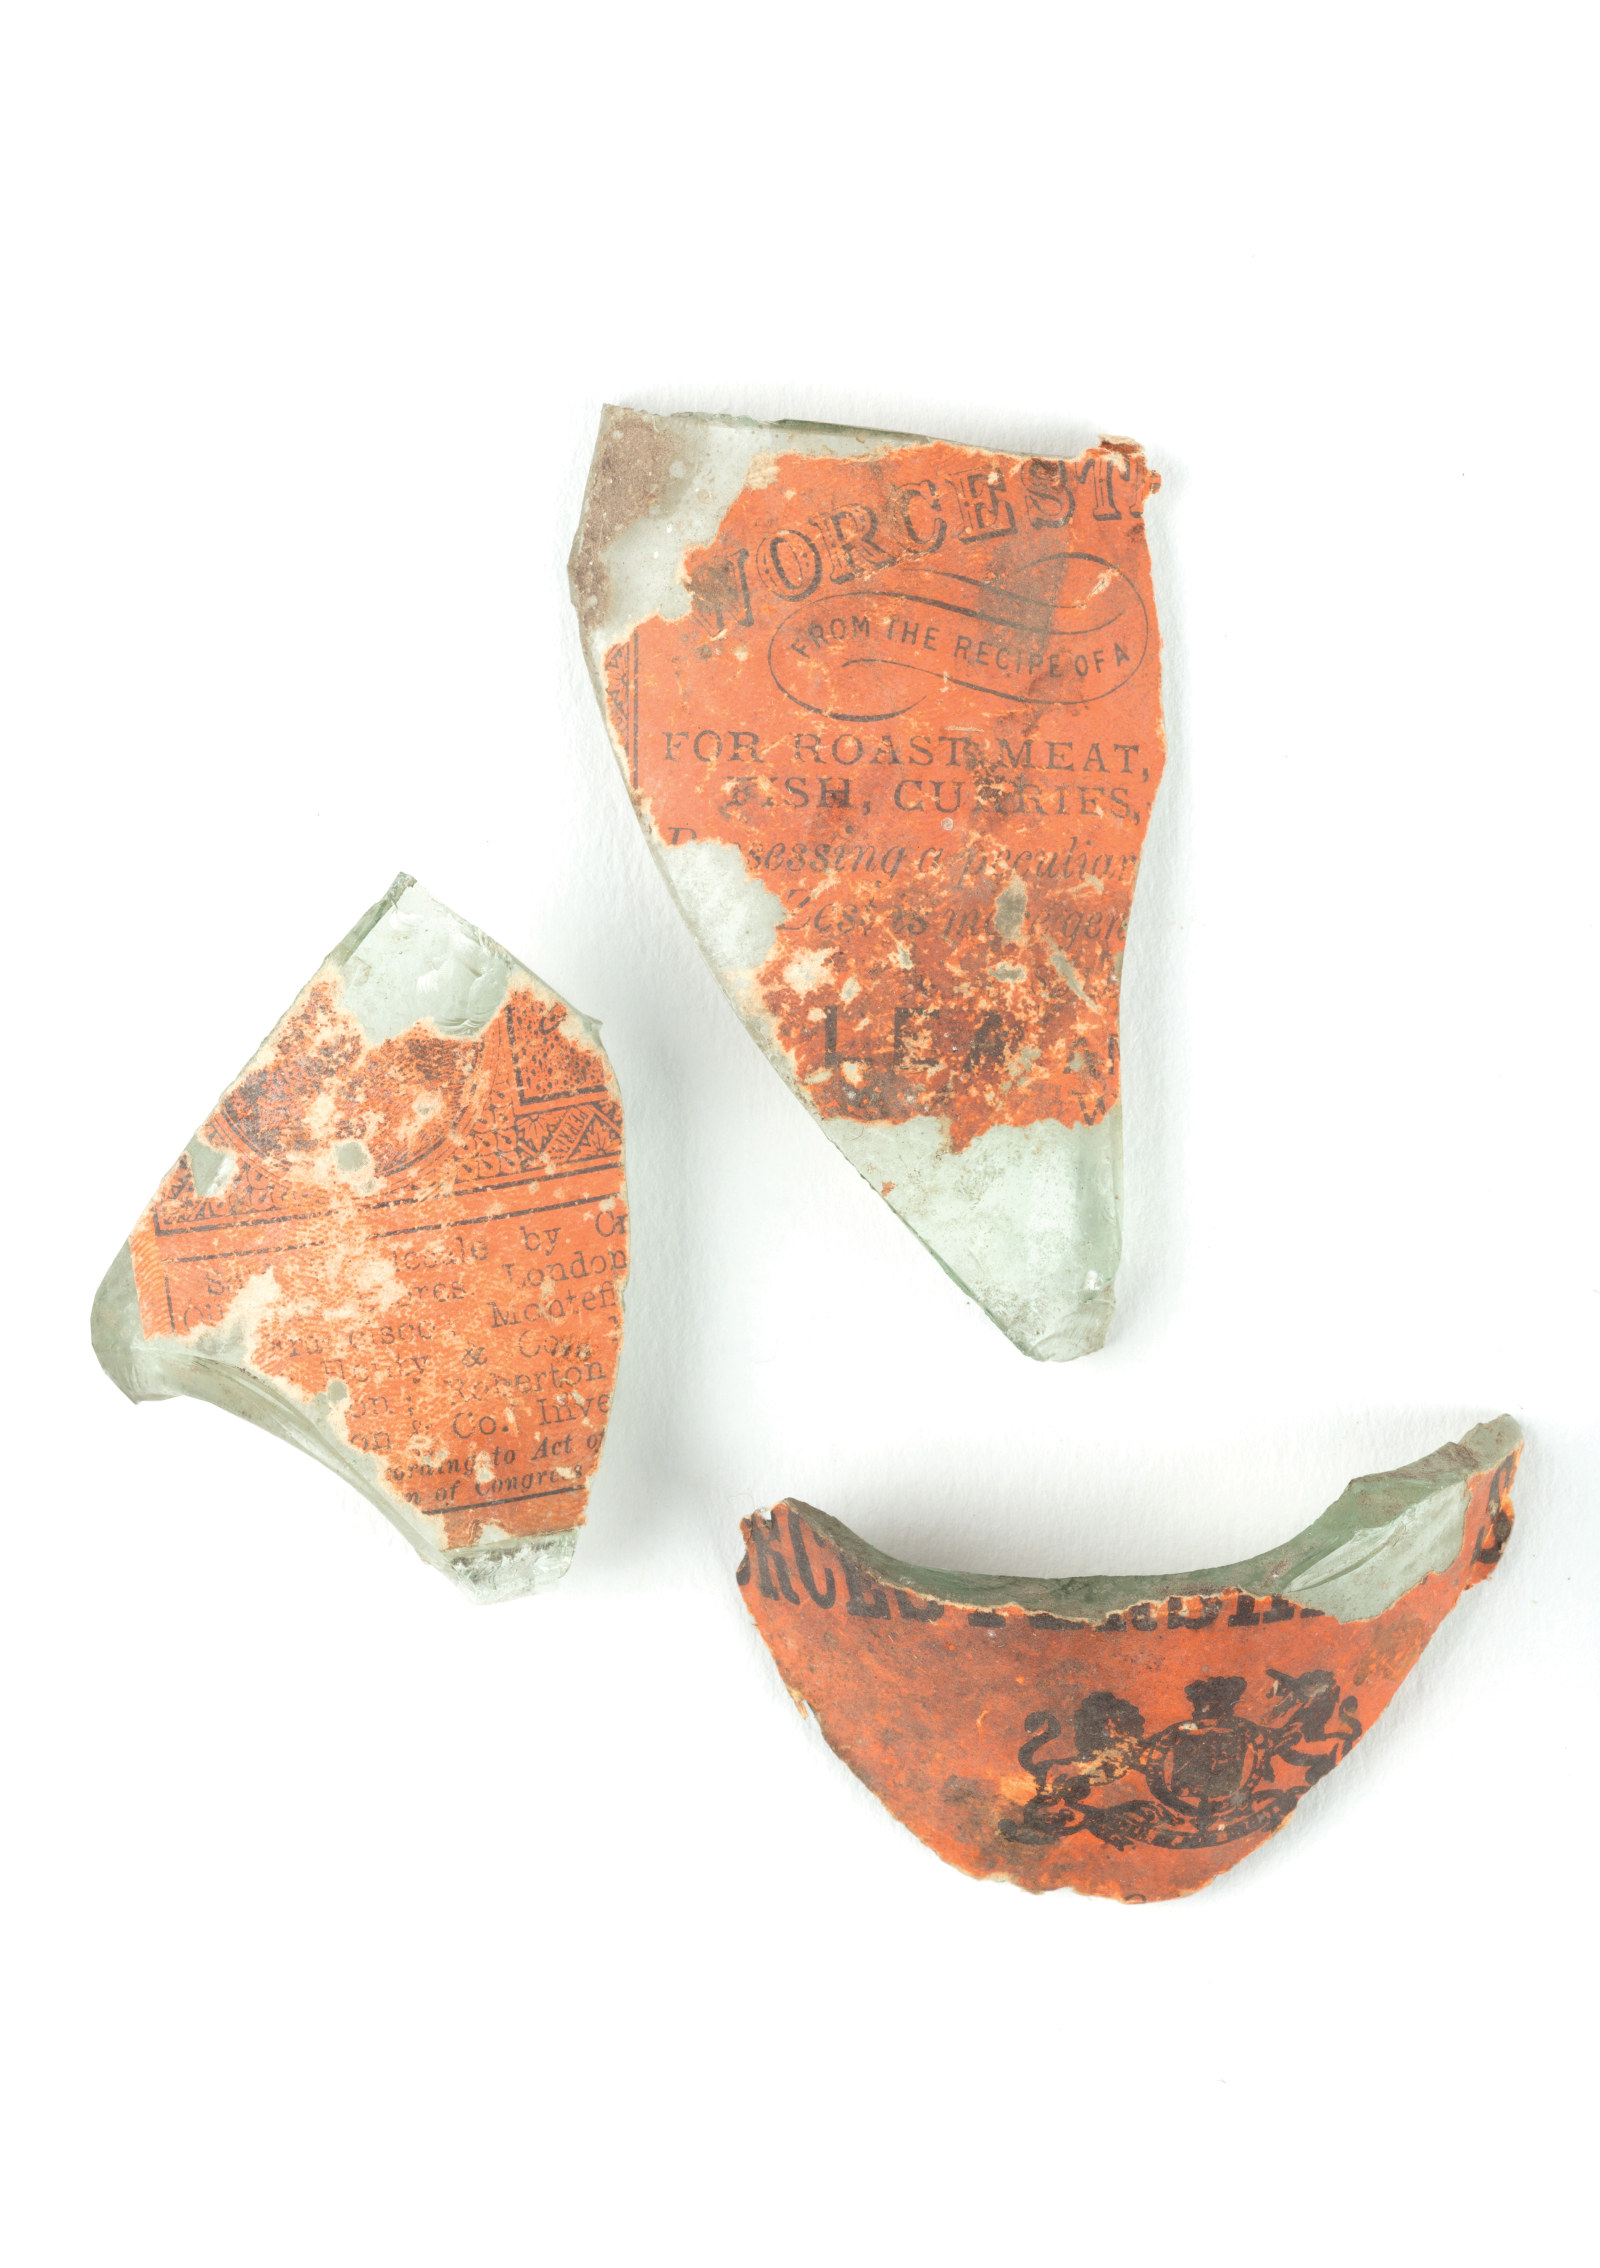 Fragments of Worcestershire sauce bottle